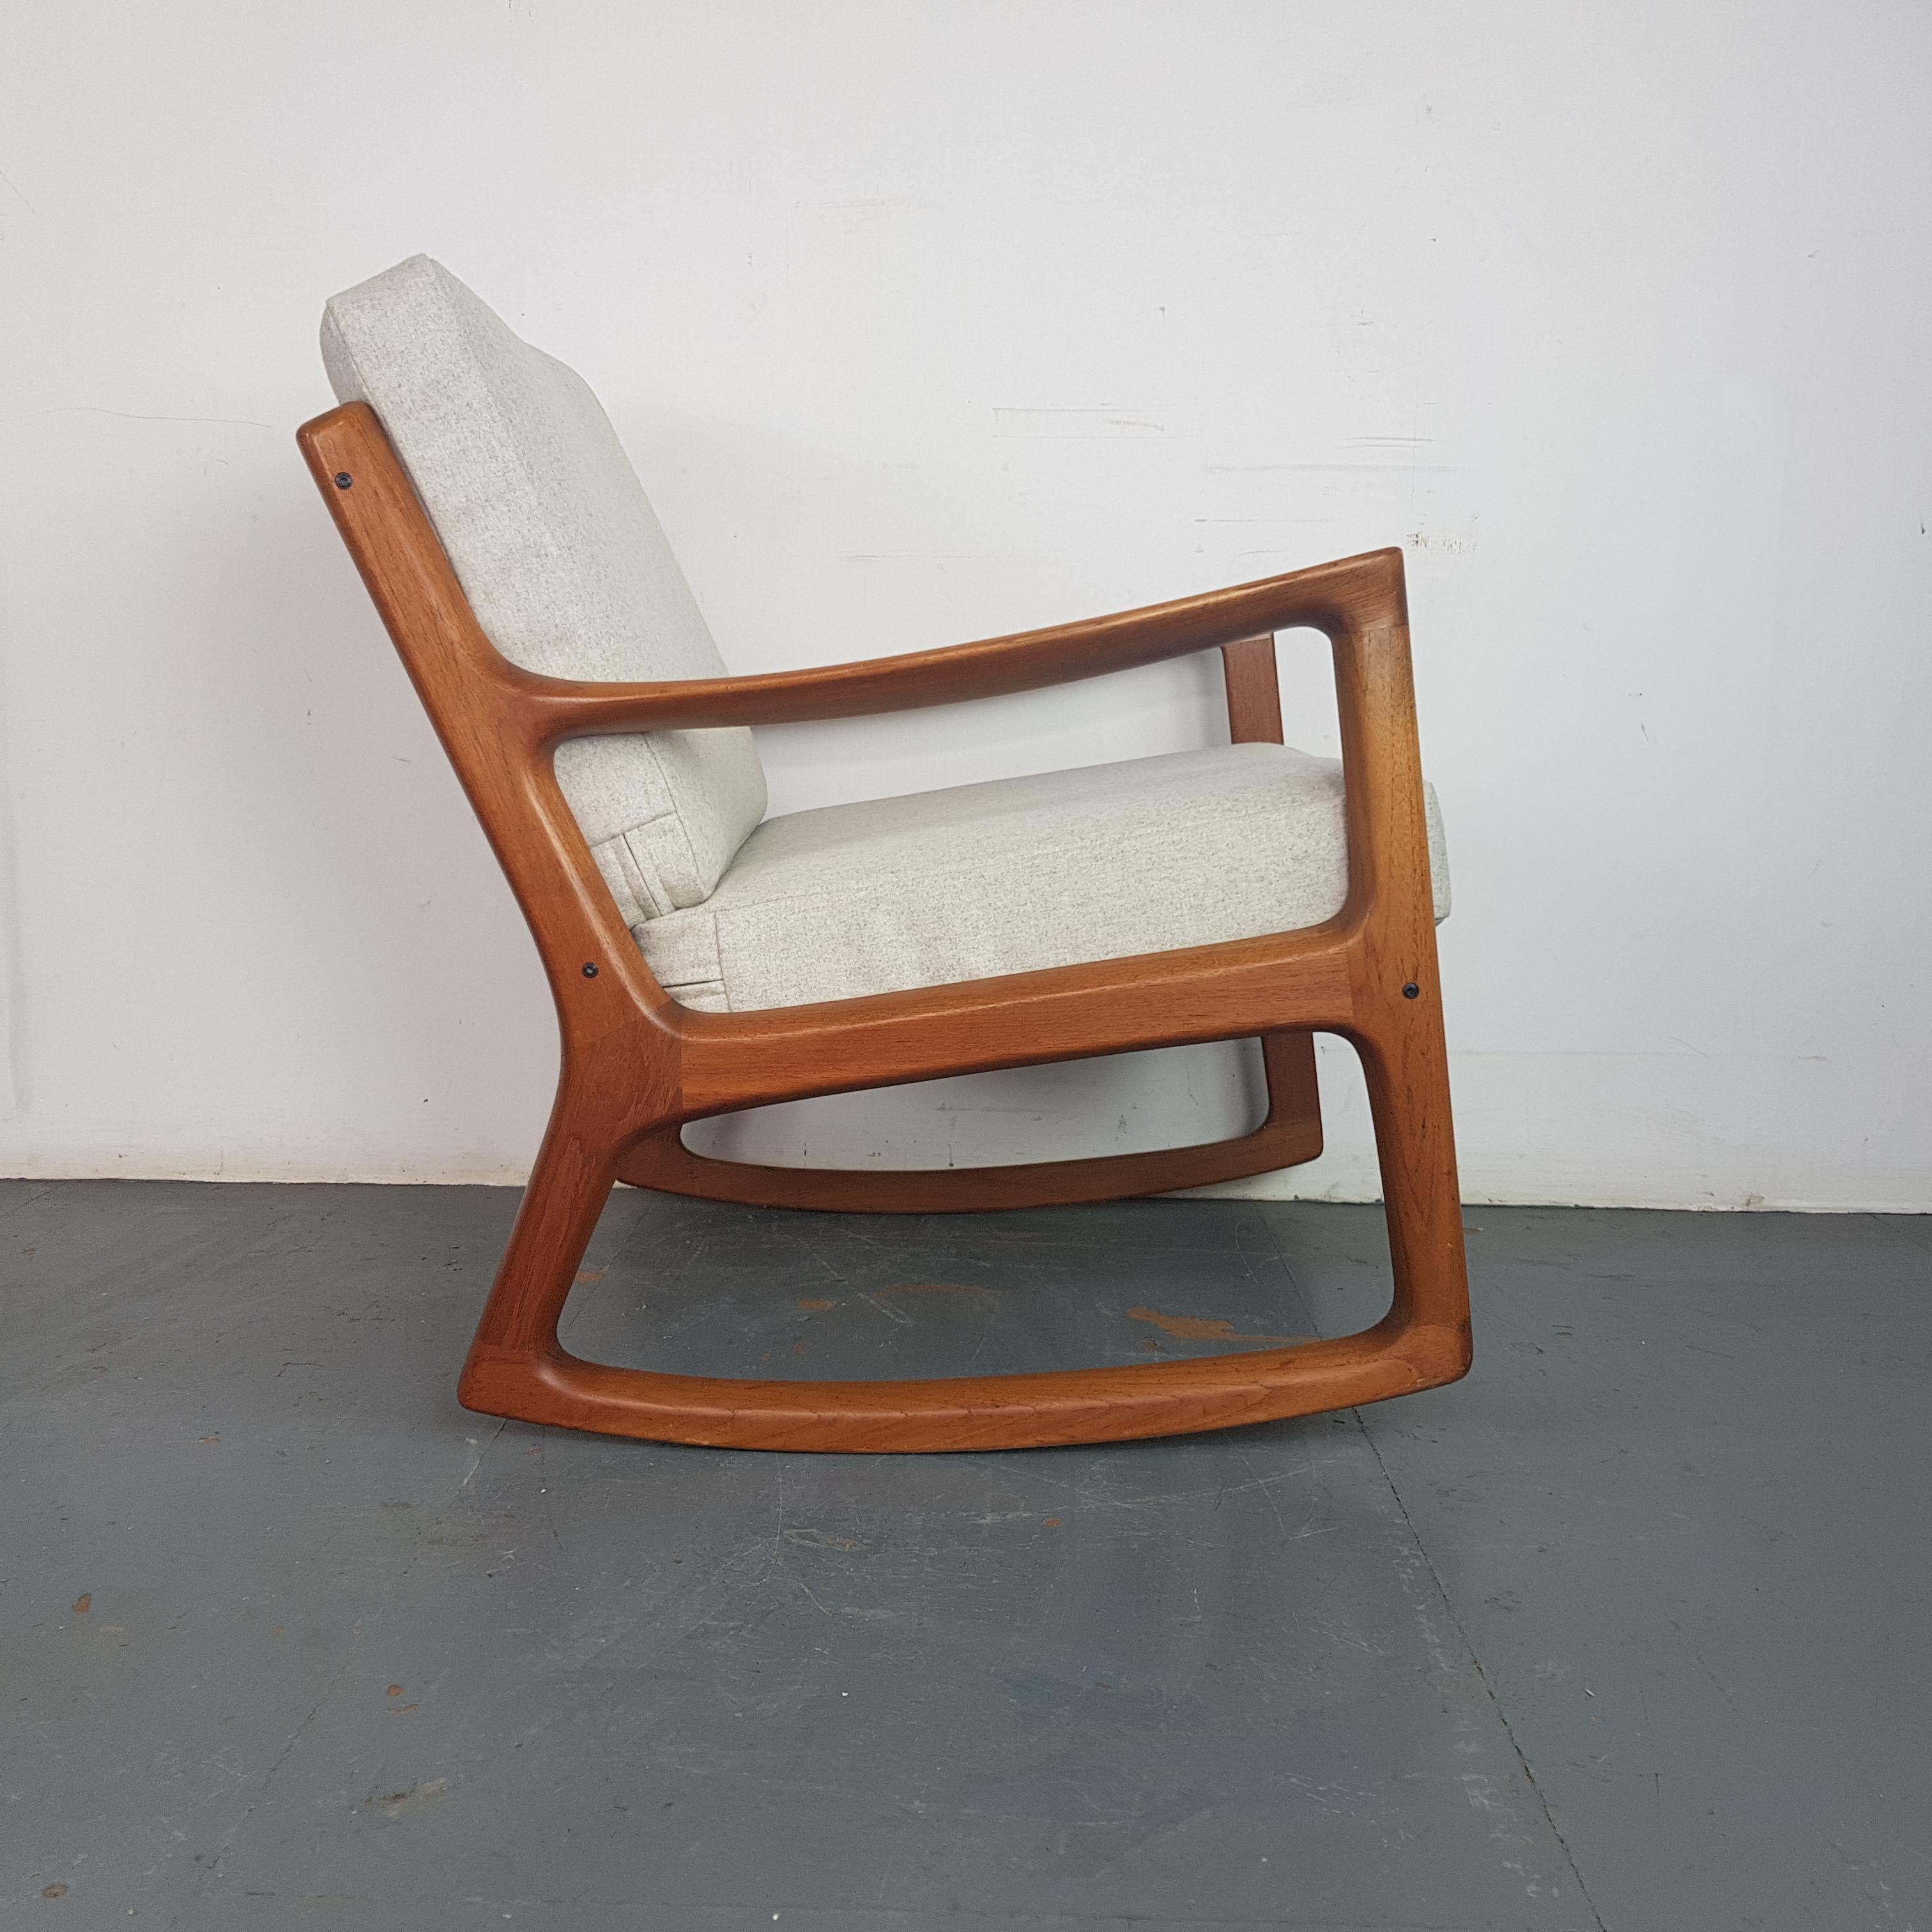 Danish Ole Wanscher, 1960s Teak Rocking Chair Made by France and Son, Denmark